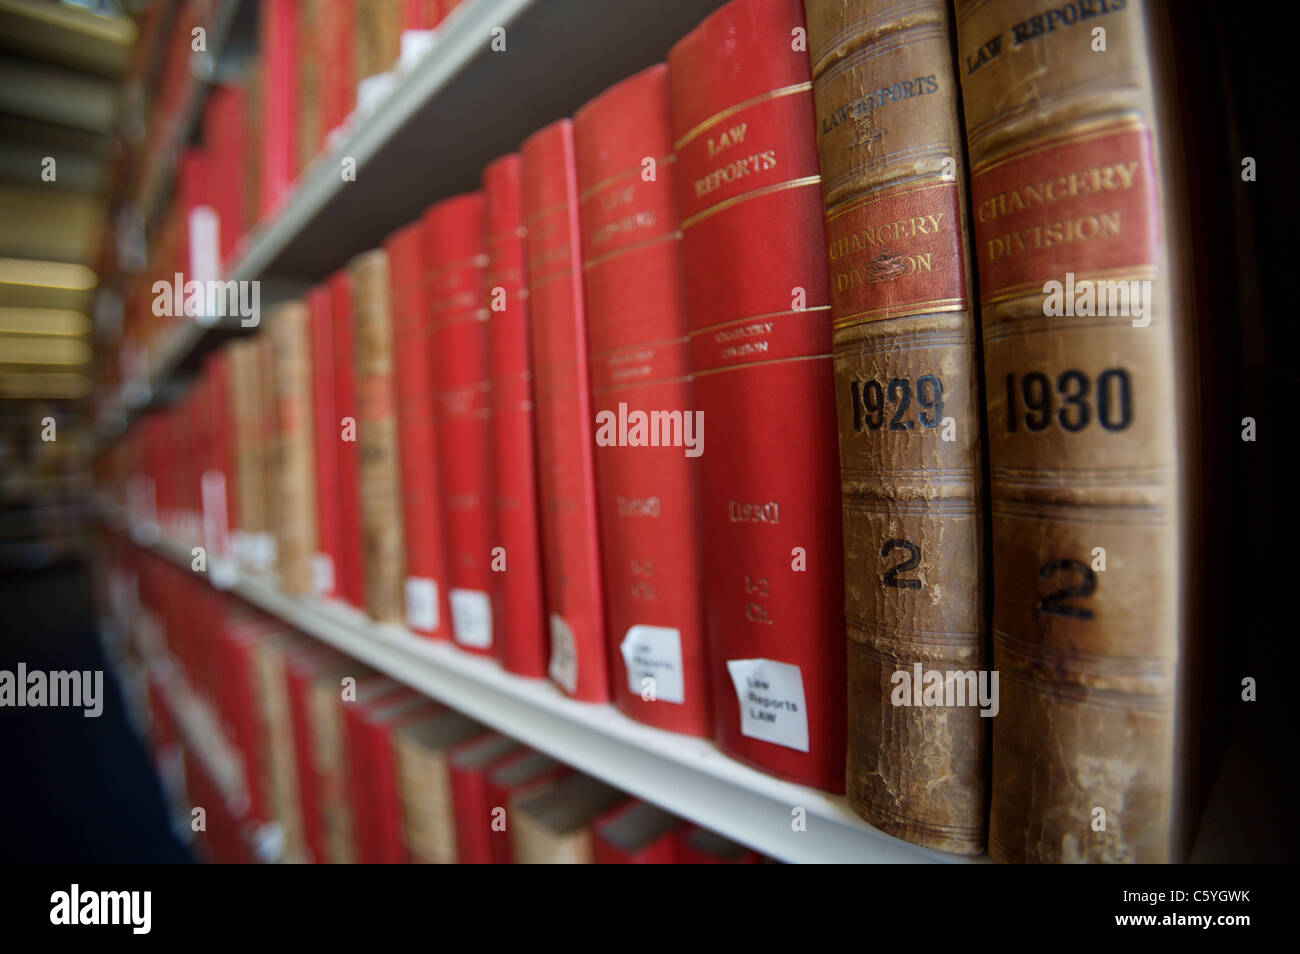 Old law book spines showing 1929 and 1930 on a library shelf with rows of red books Stock Photo